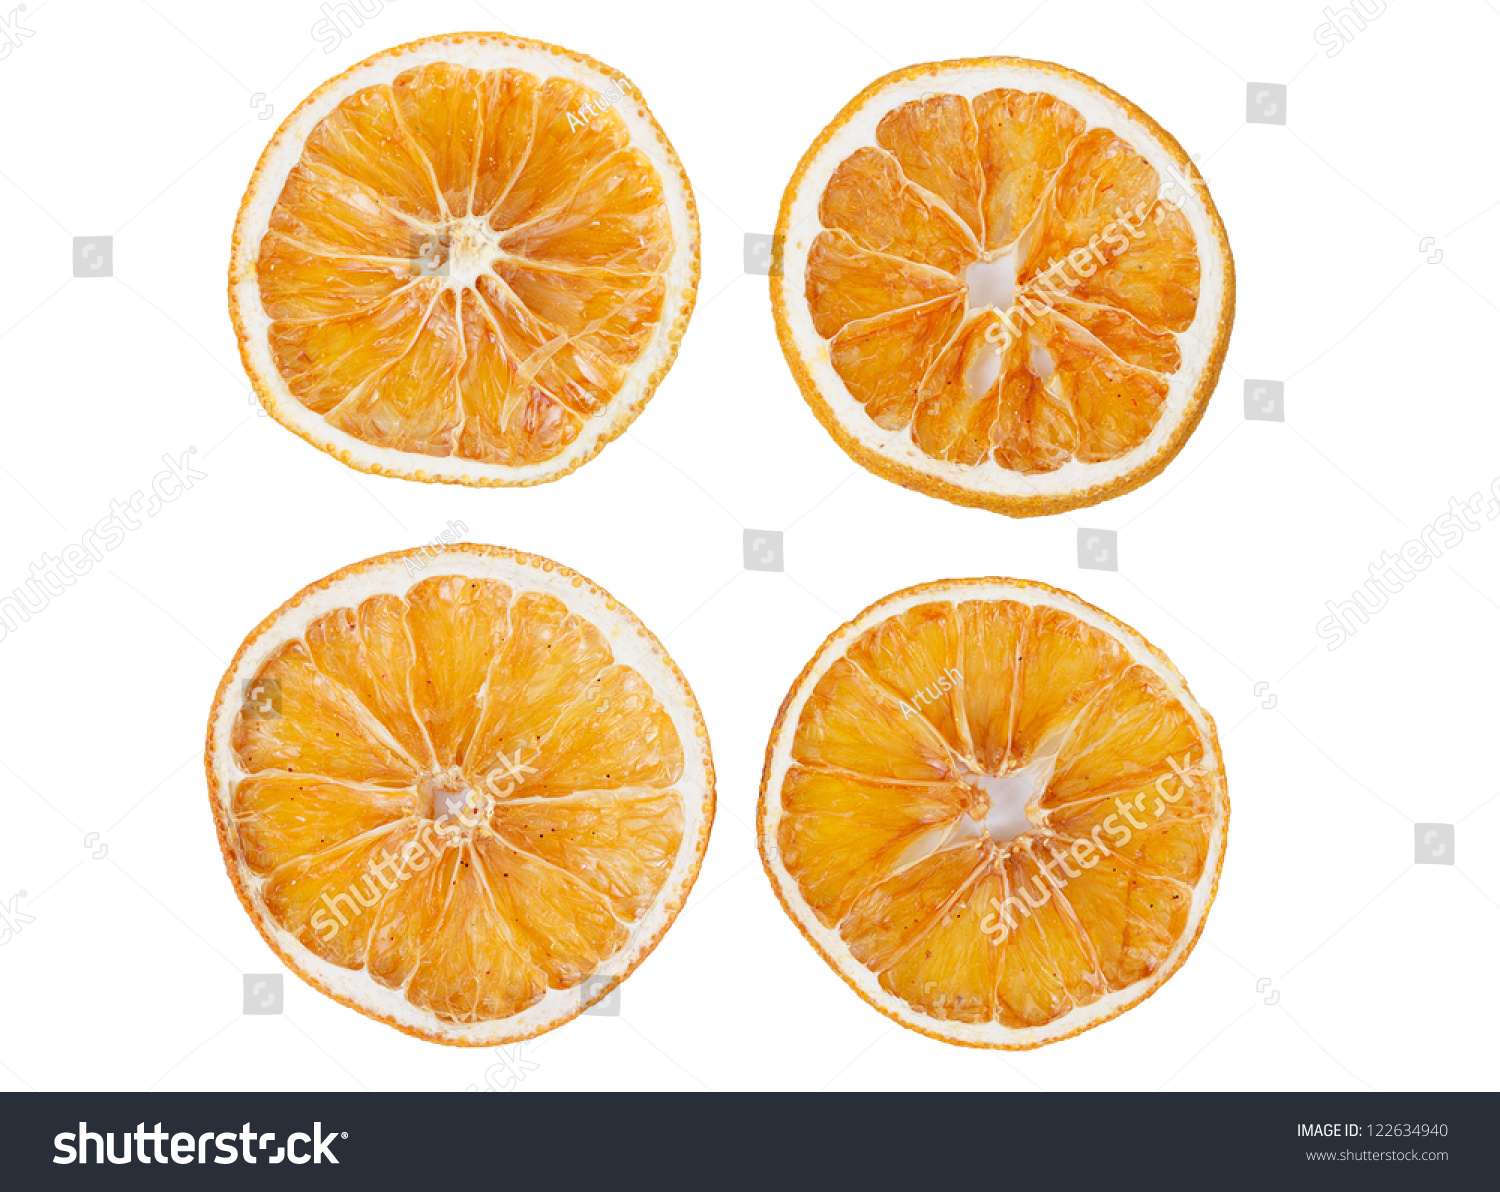 four dried slices of orange isolated on white background #122634940